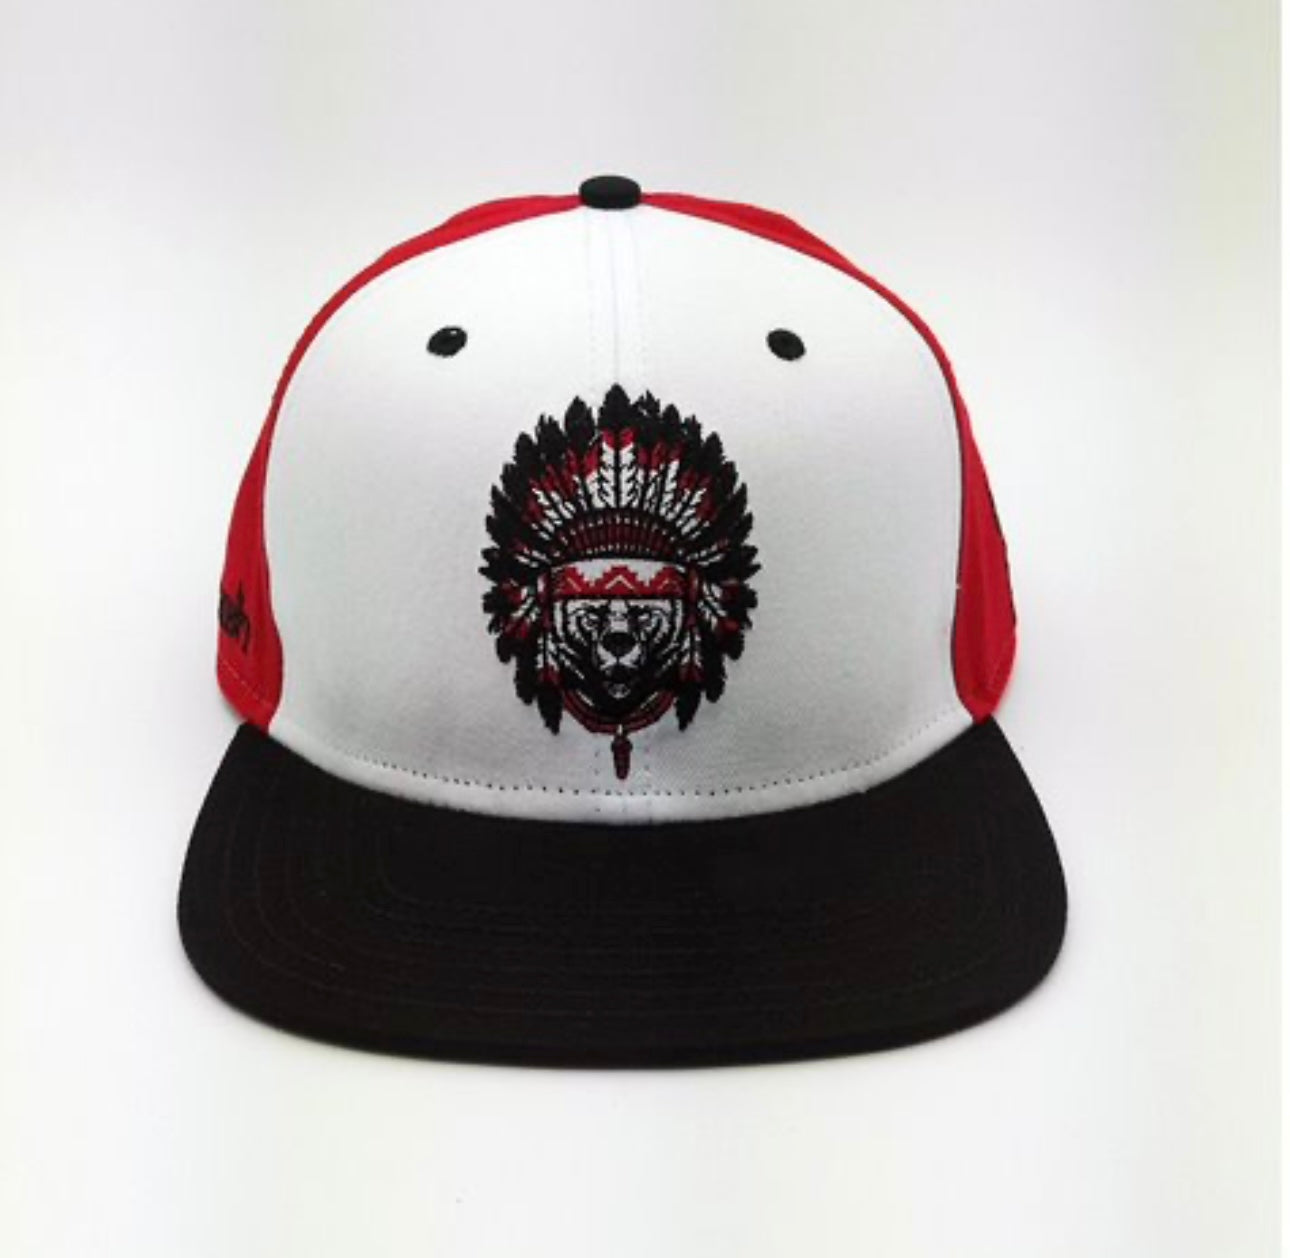 WAR Grizzly Red cap